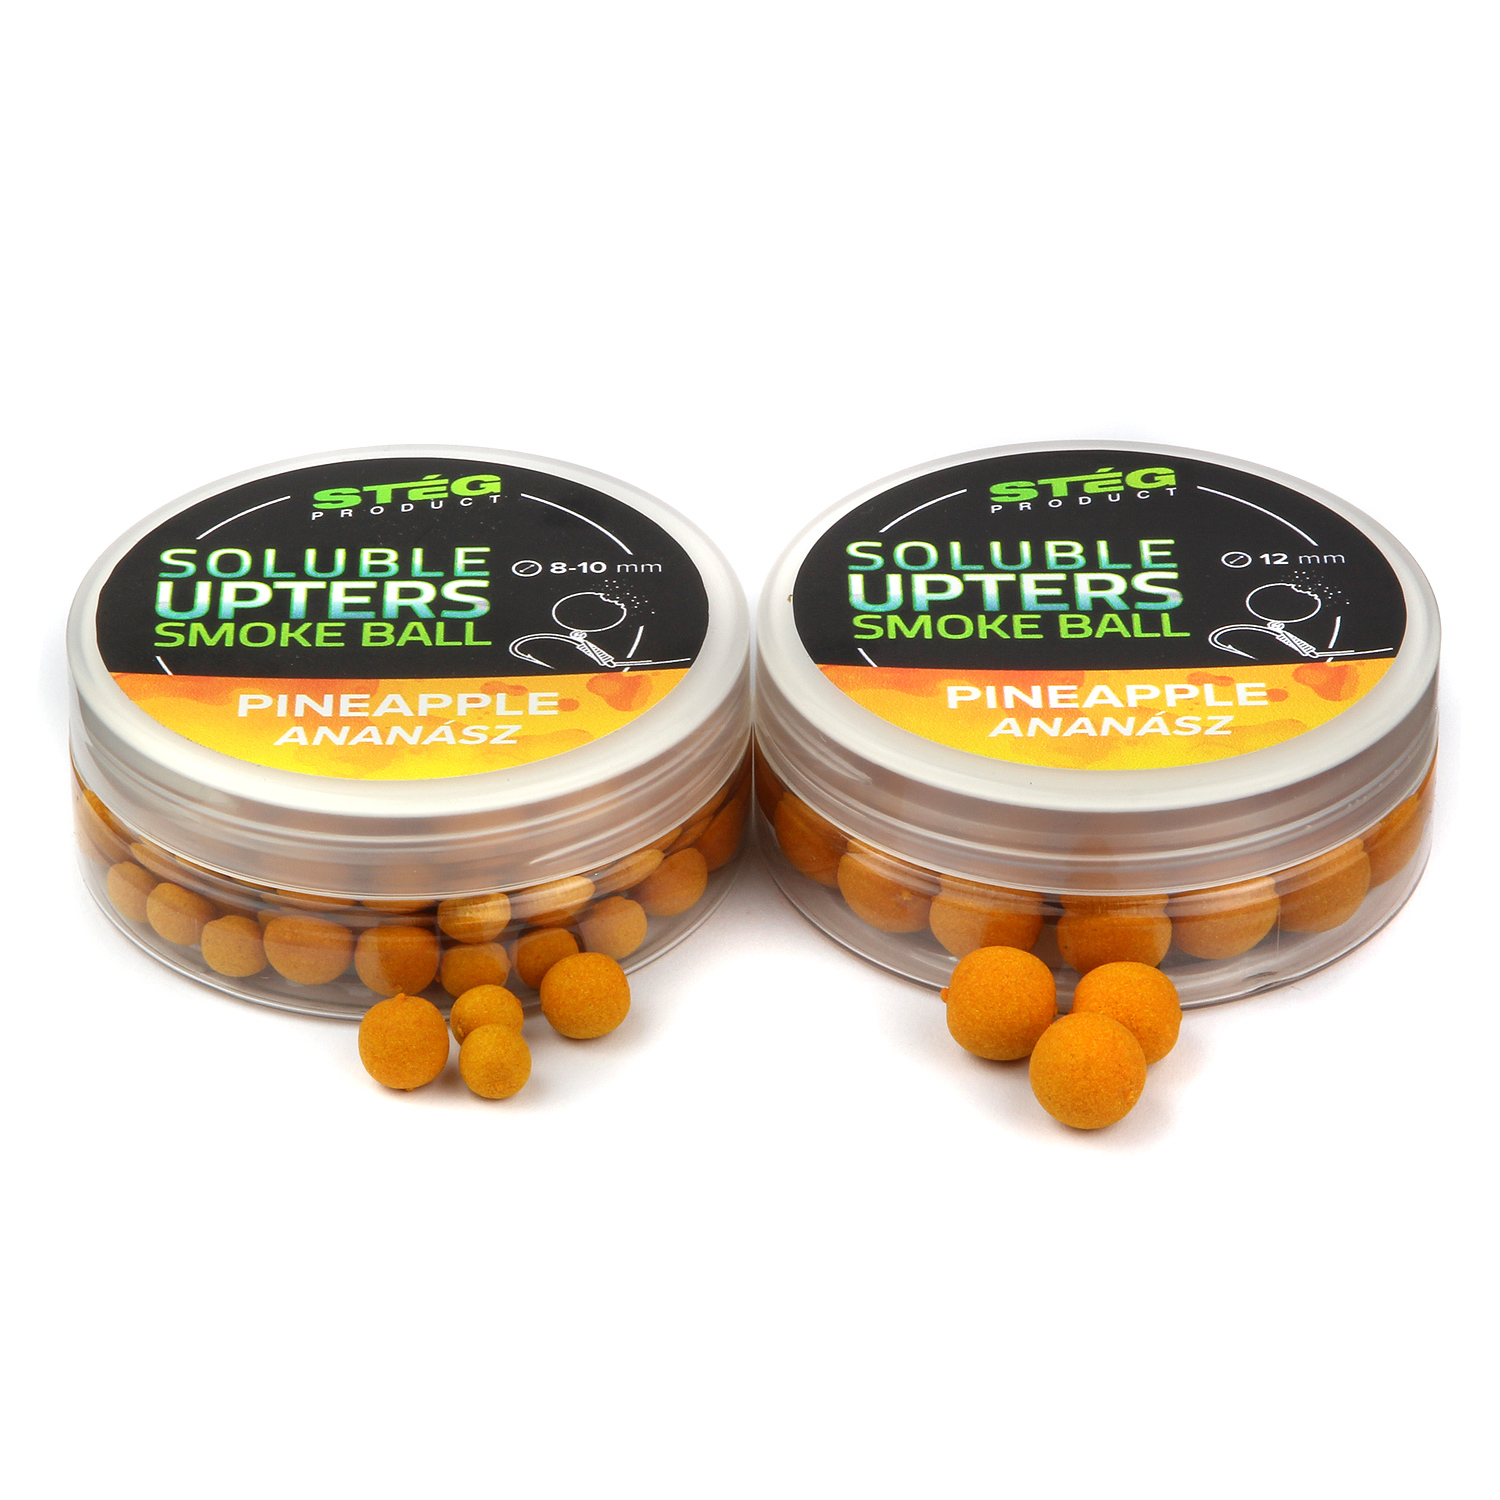 Stg Product Soluble Upters Smoke Ball 8-10mm Pineapple 30g